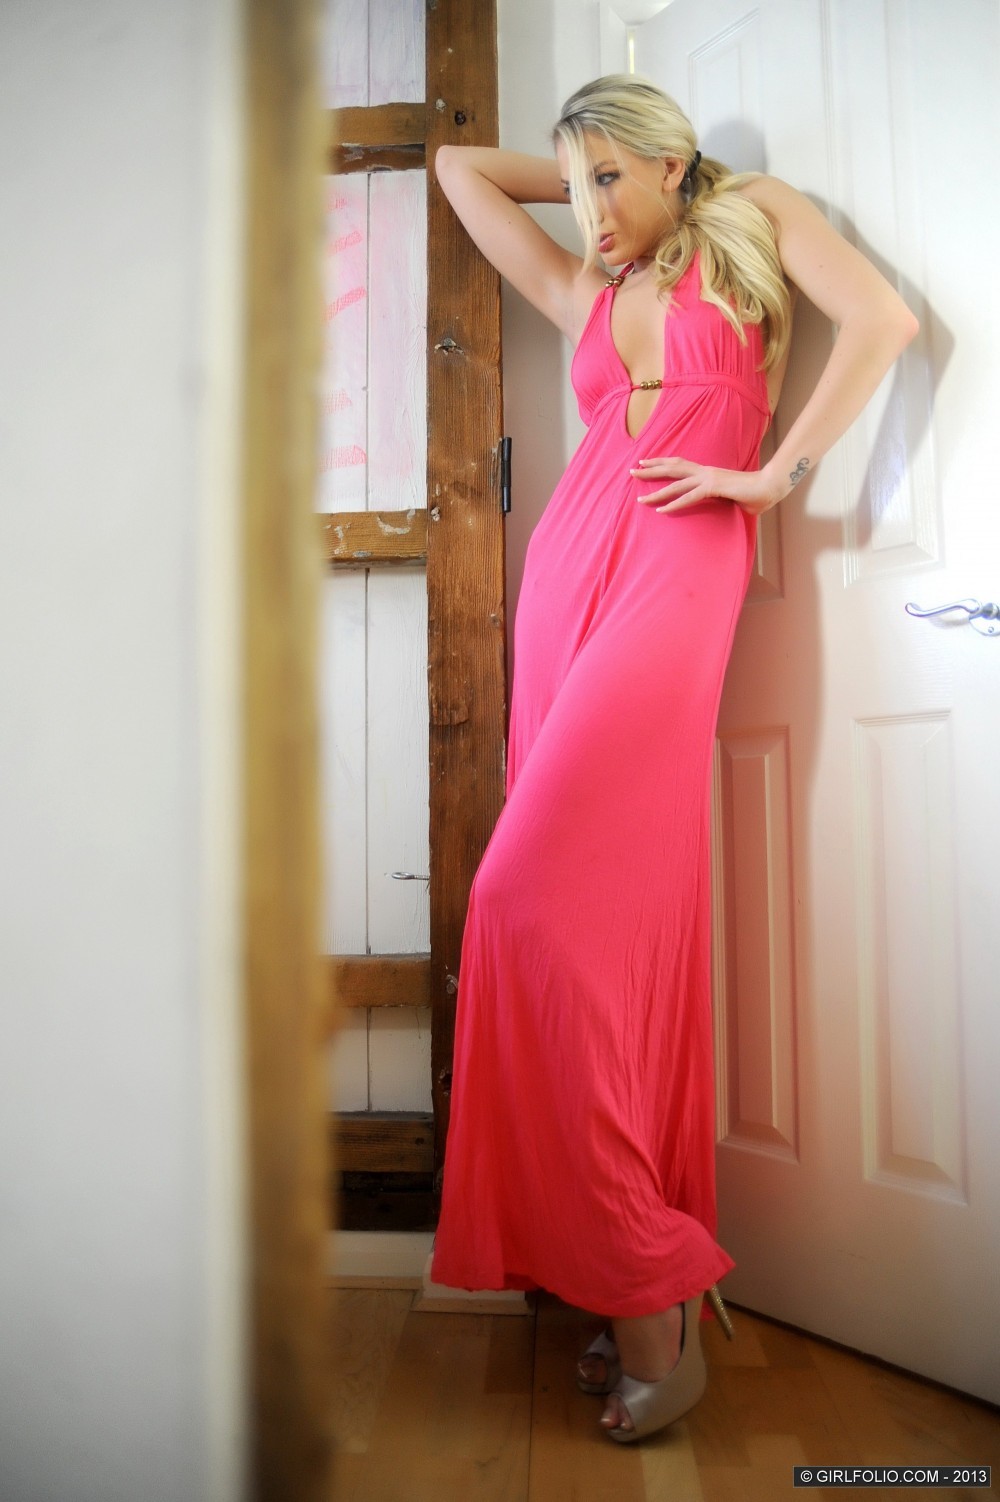 Danielle Maye poses and strips out of her elegant pink evening dress #72580917